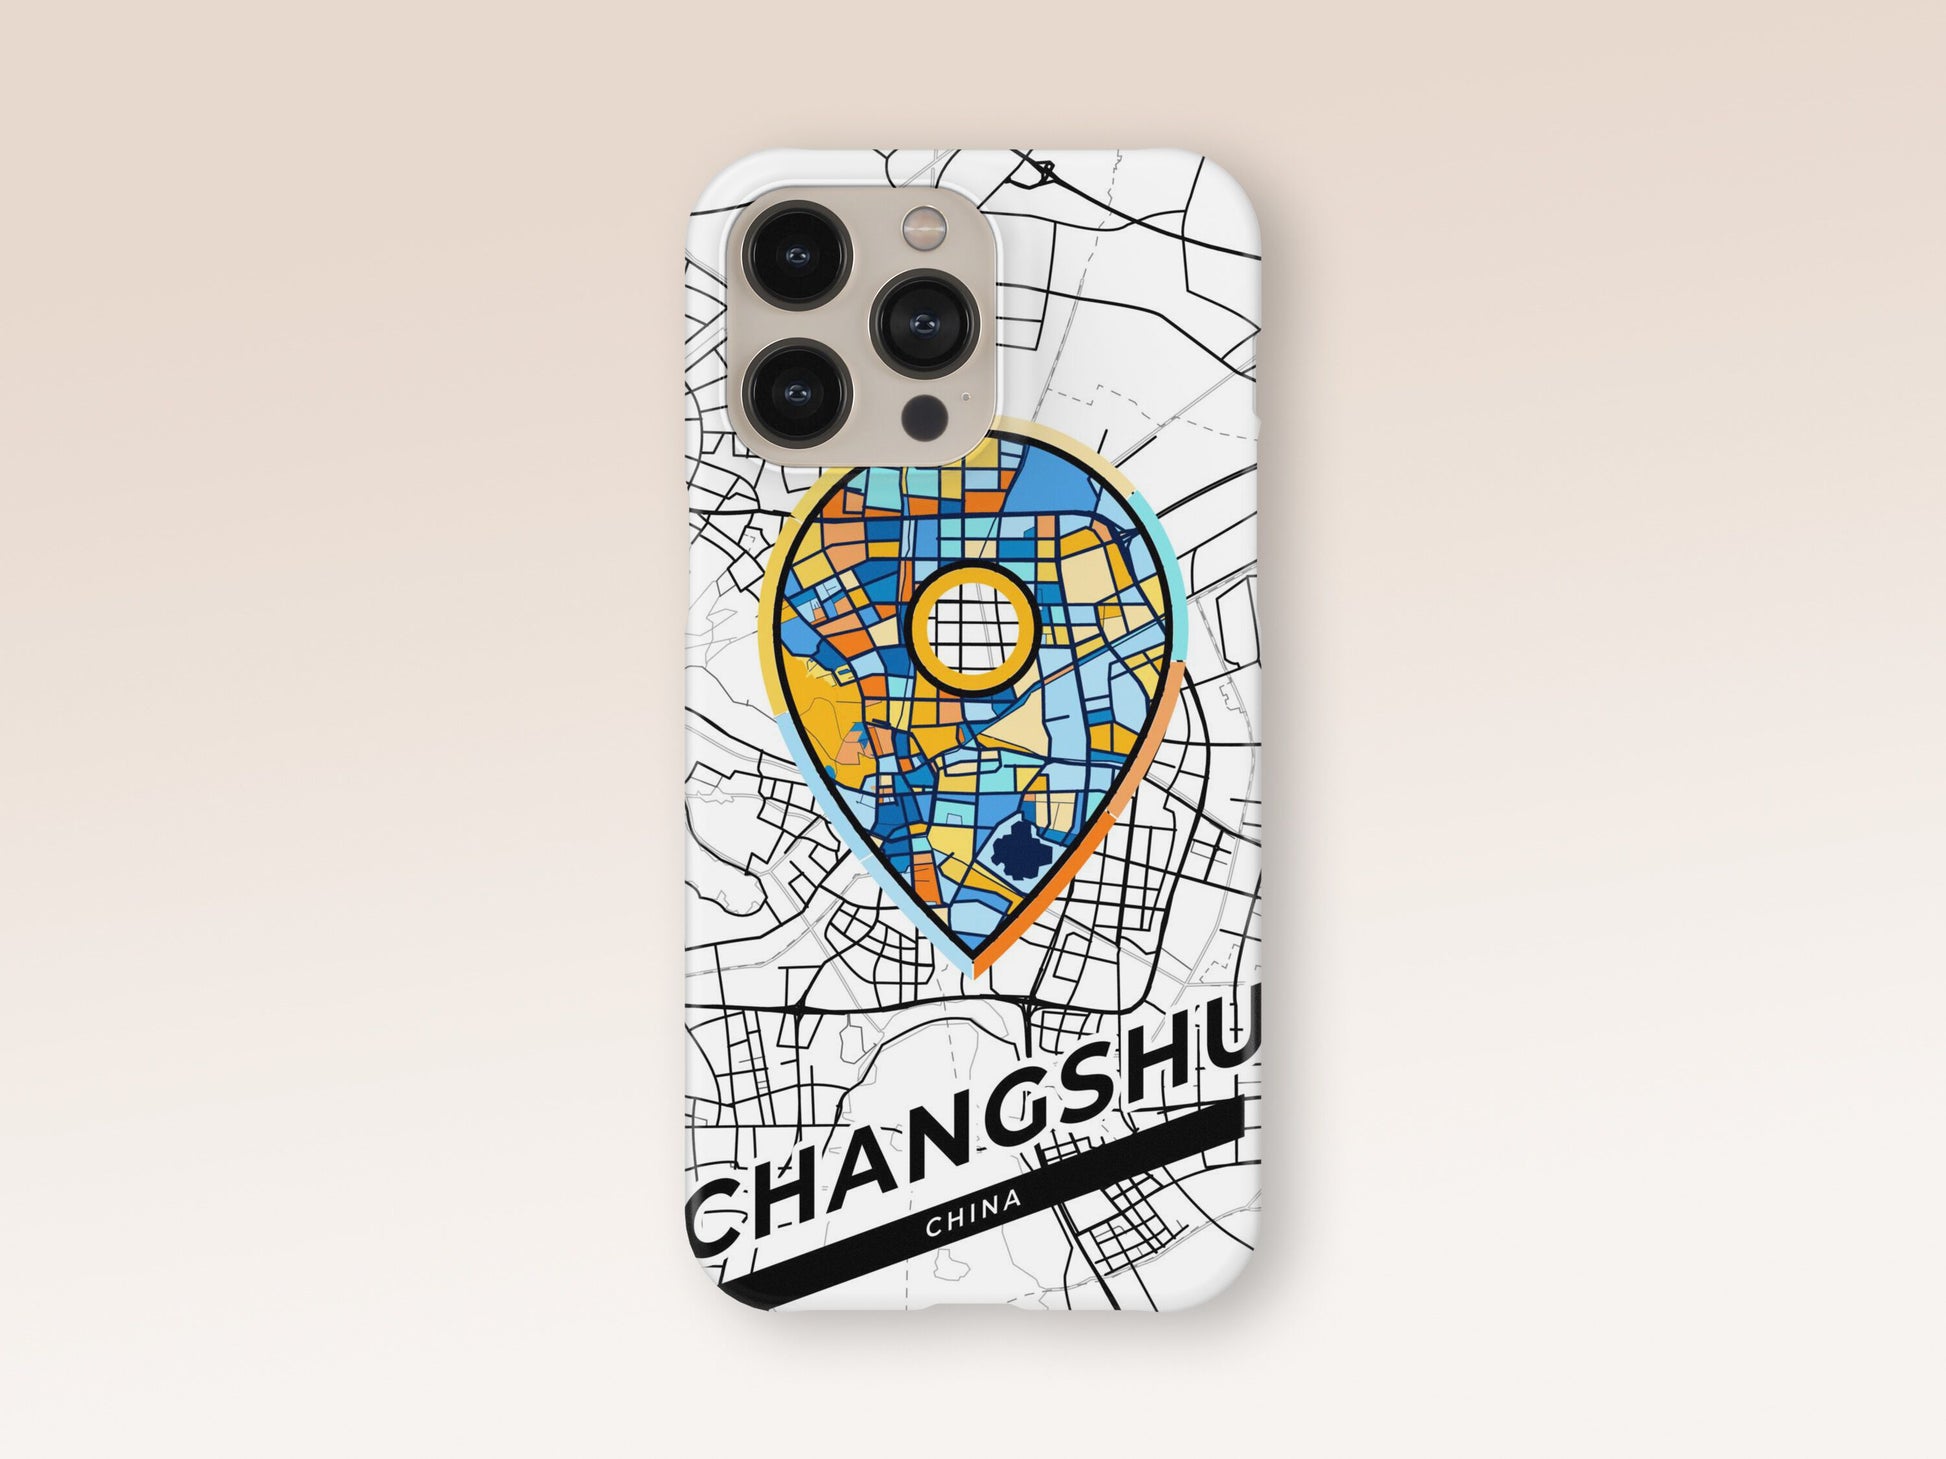 Changshu China slim phone case with colorful icon. Birthday, wedding or housewarming gift. Couple match cases. 1